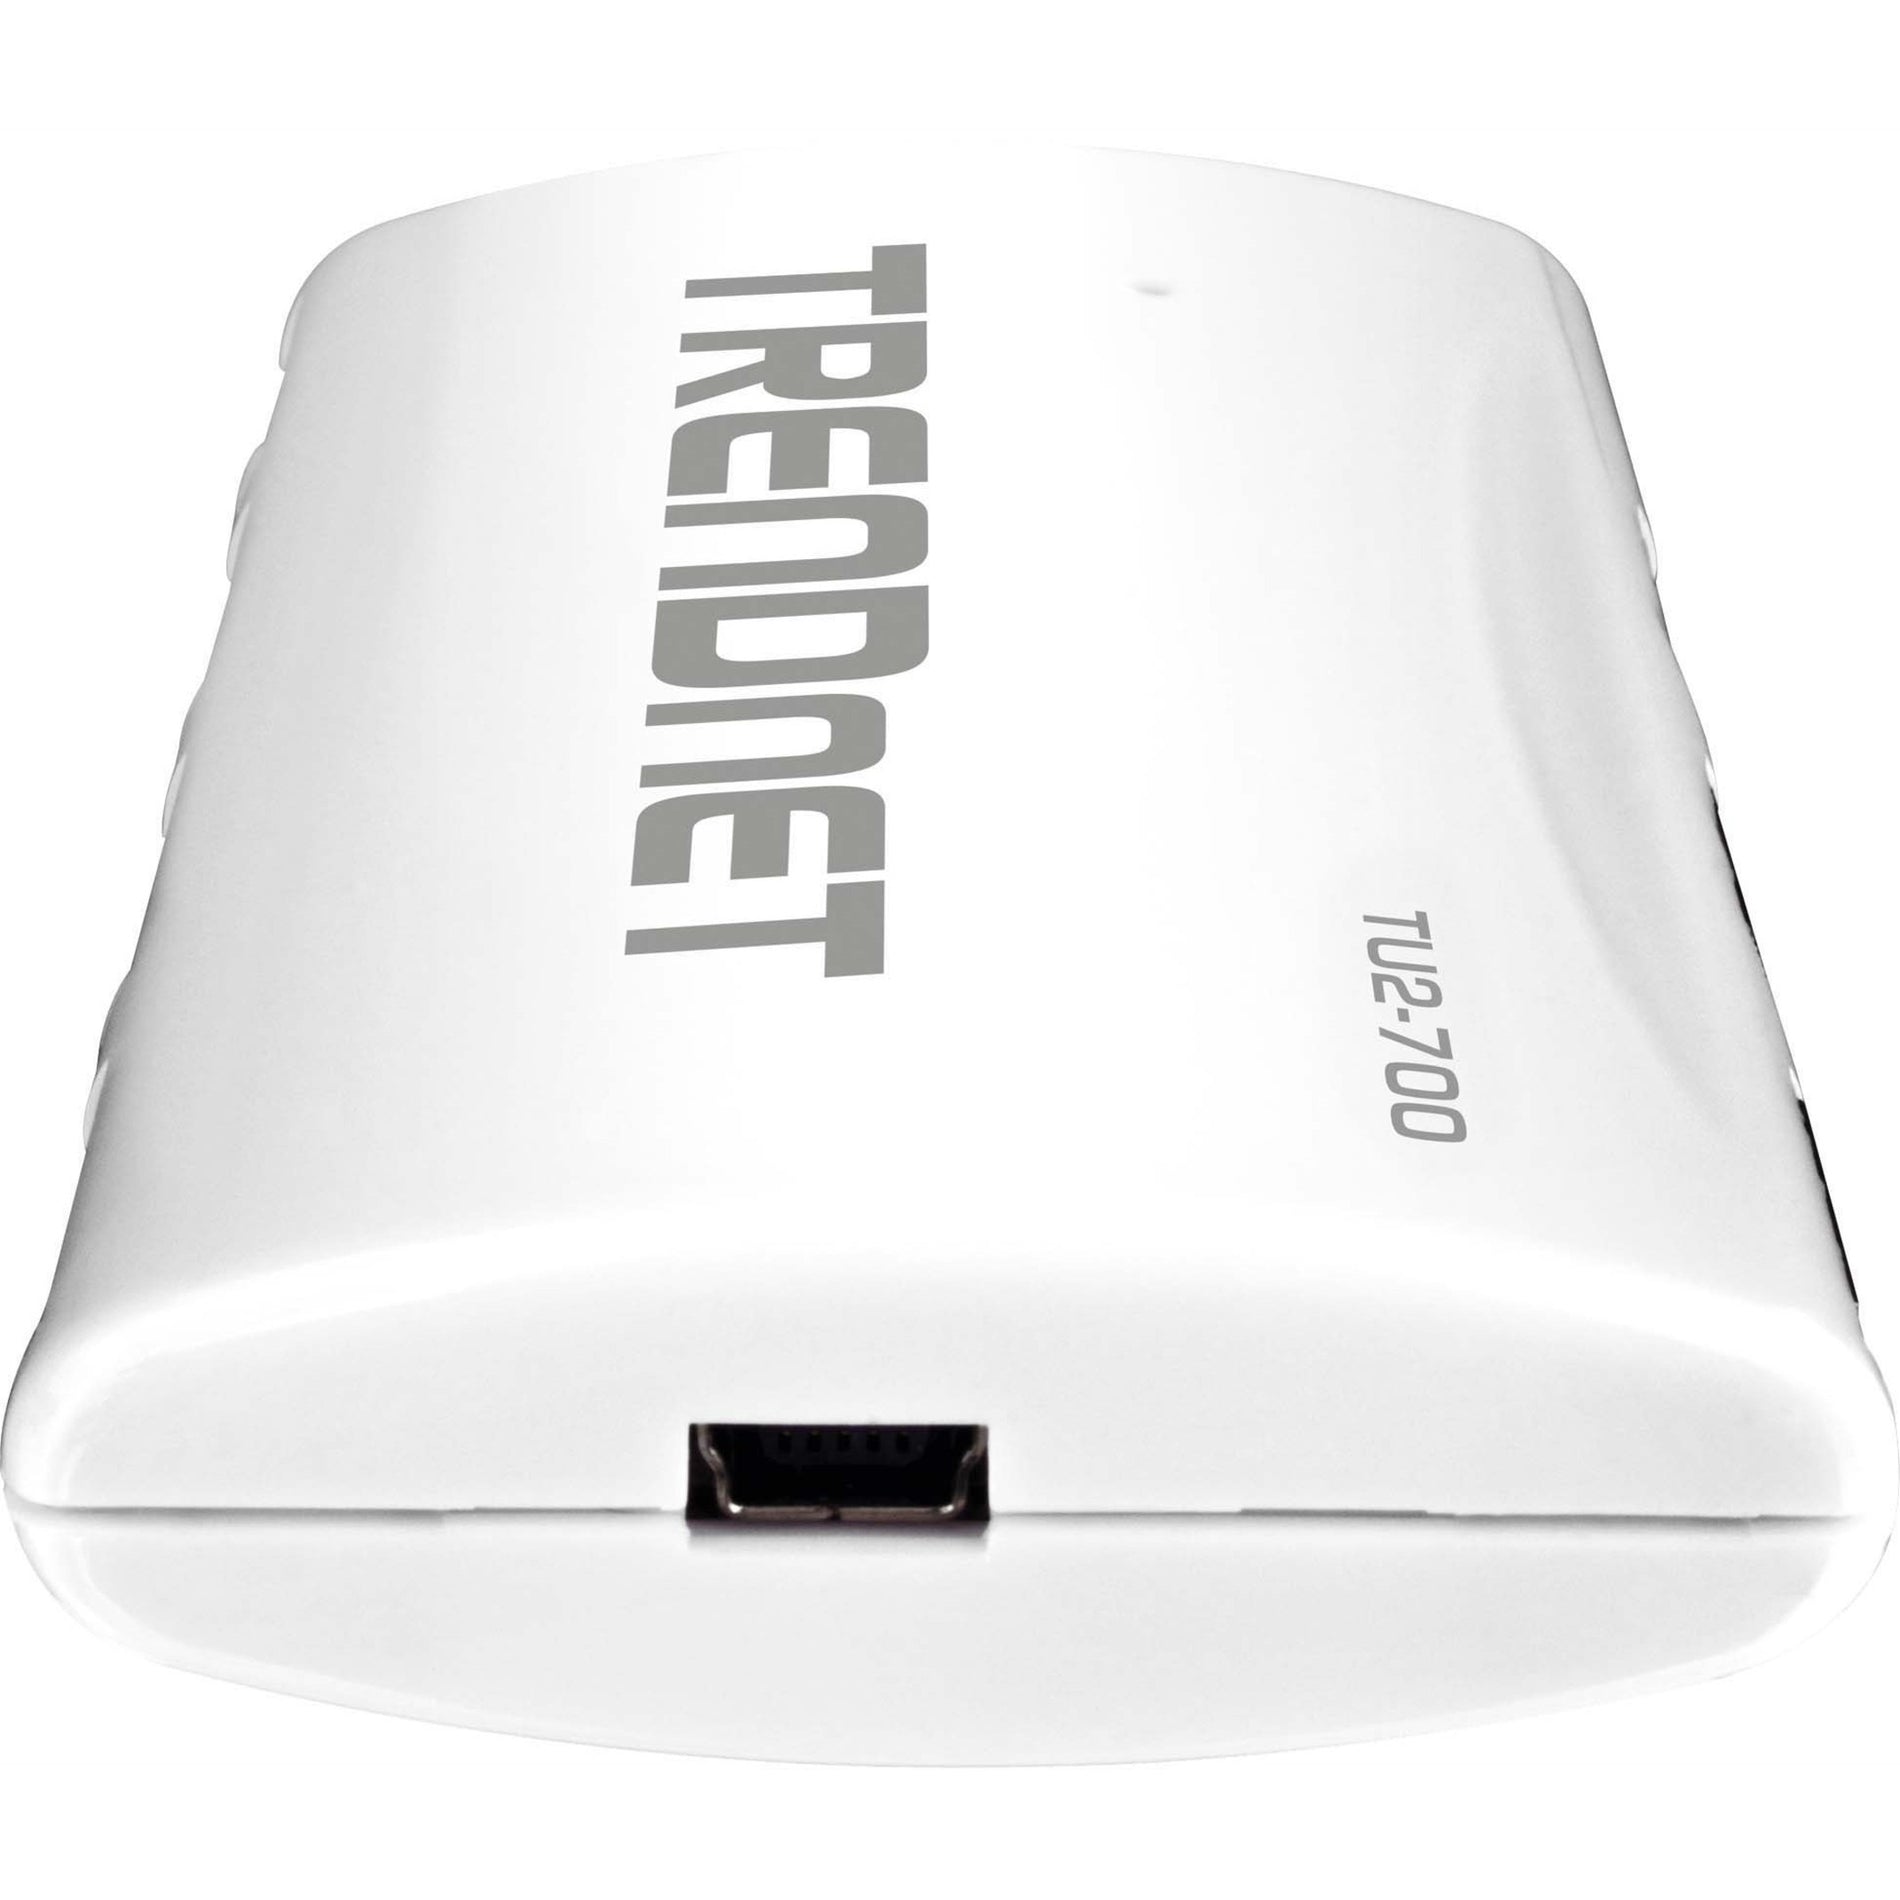 TRENDnet TU2-700 High Speed USB 2.0 7-port Hub with Power Adapter, Up to 480 Mbps Connection Speeds